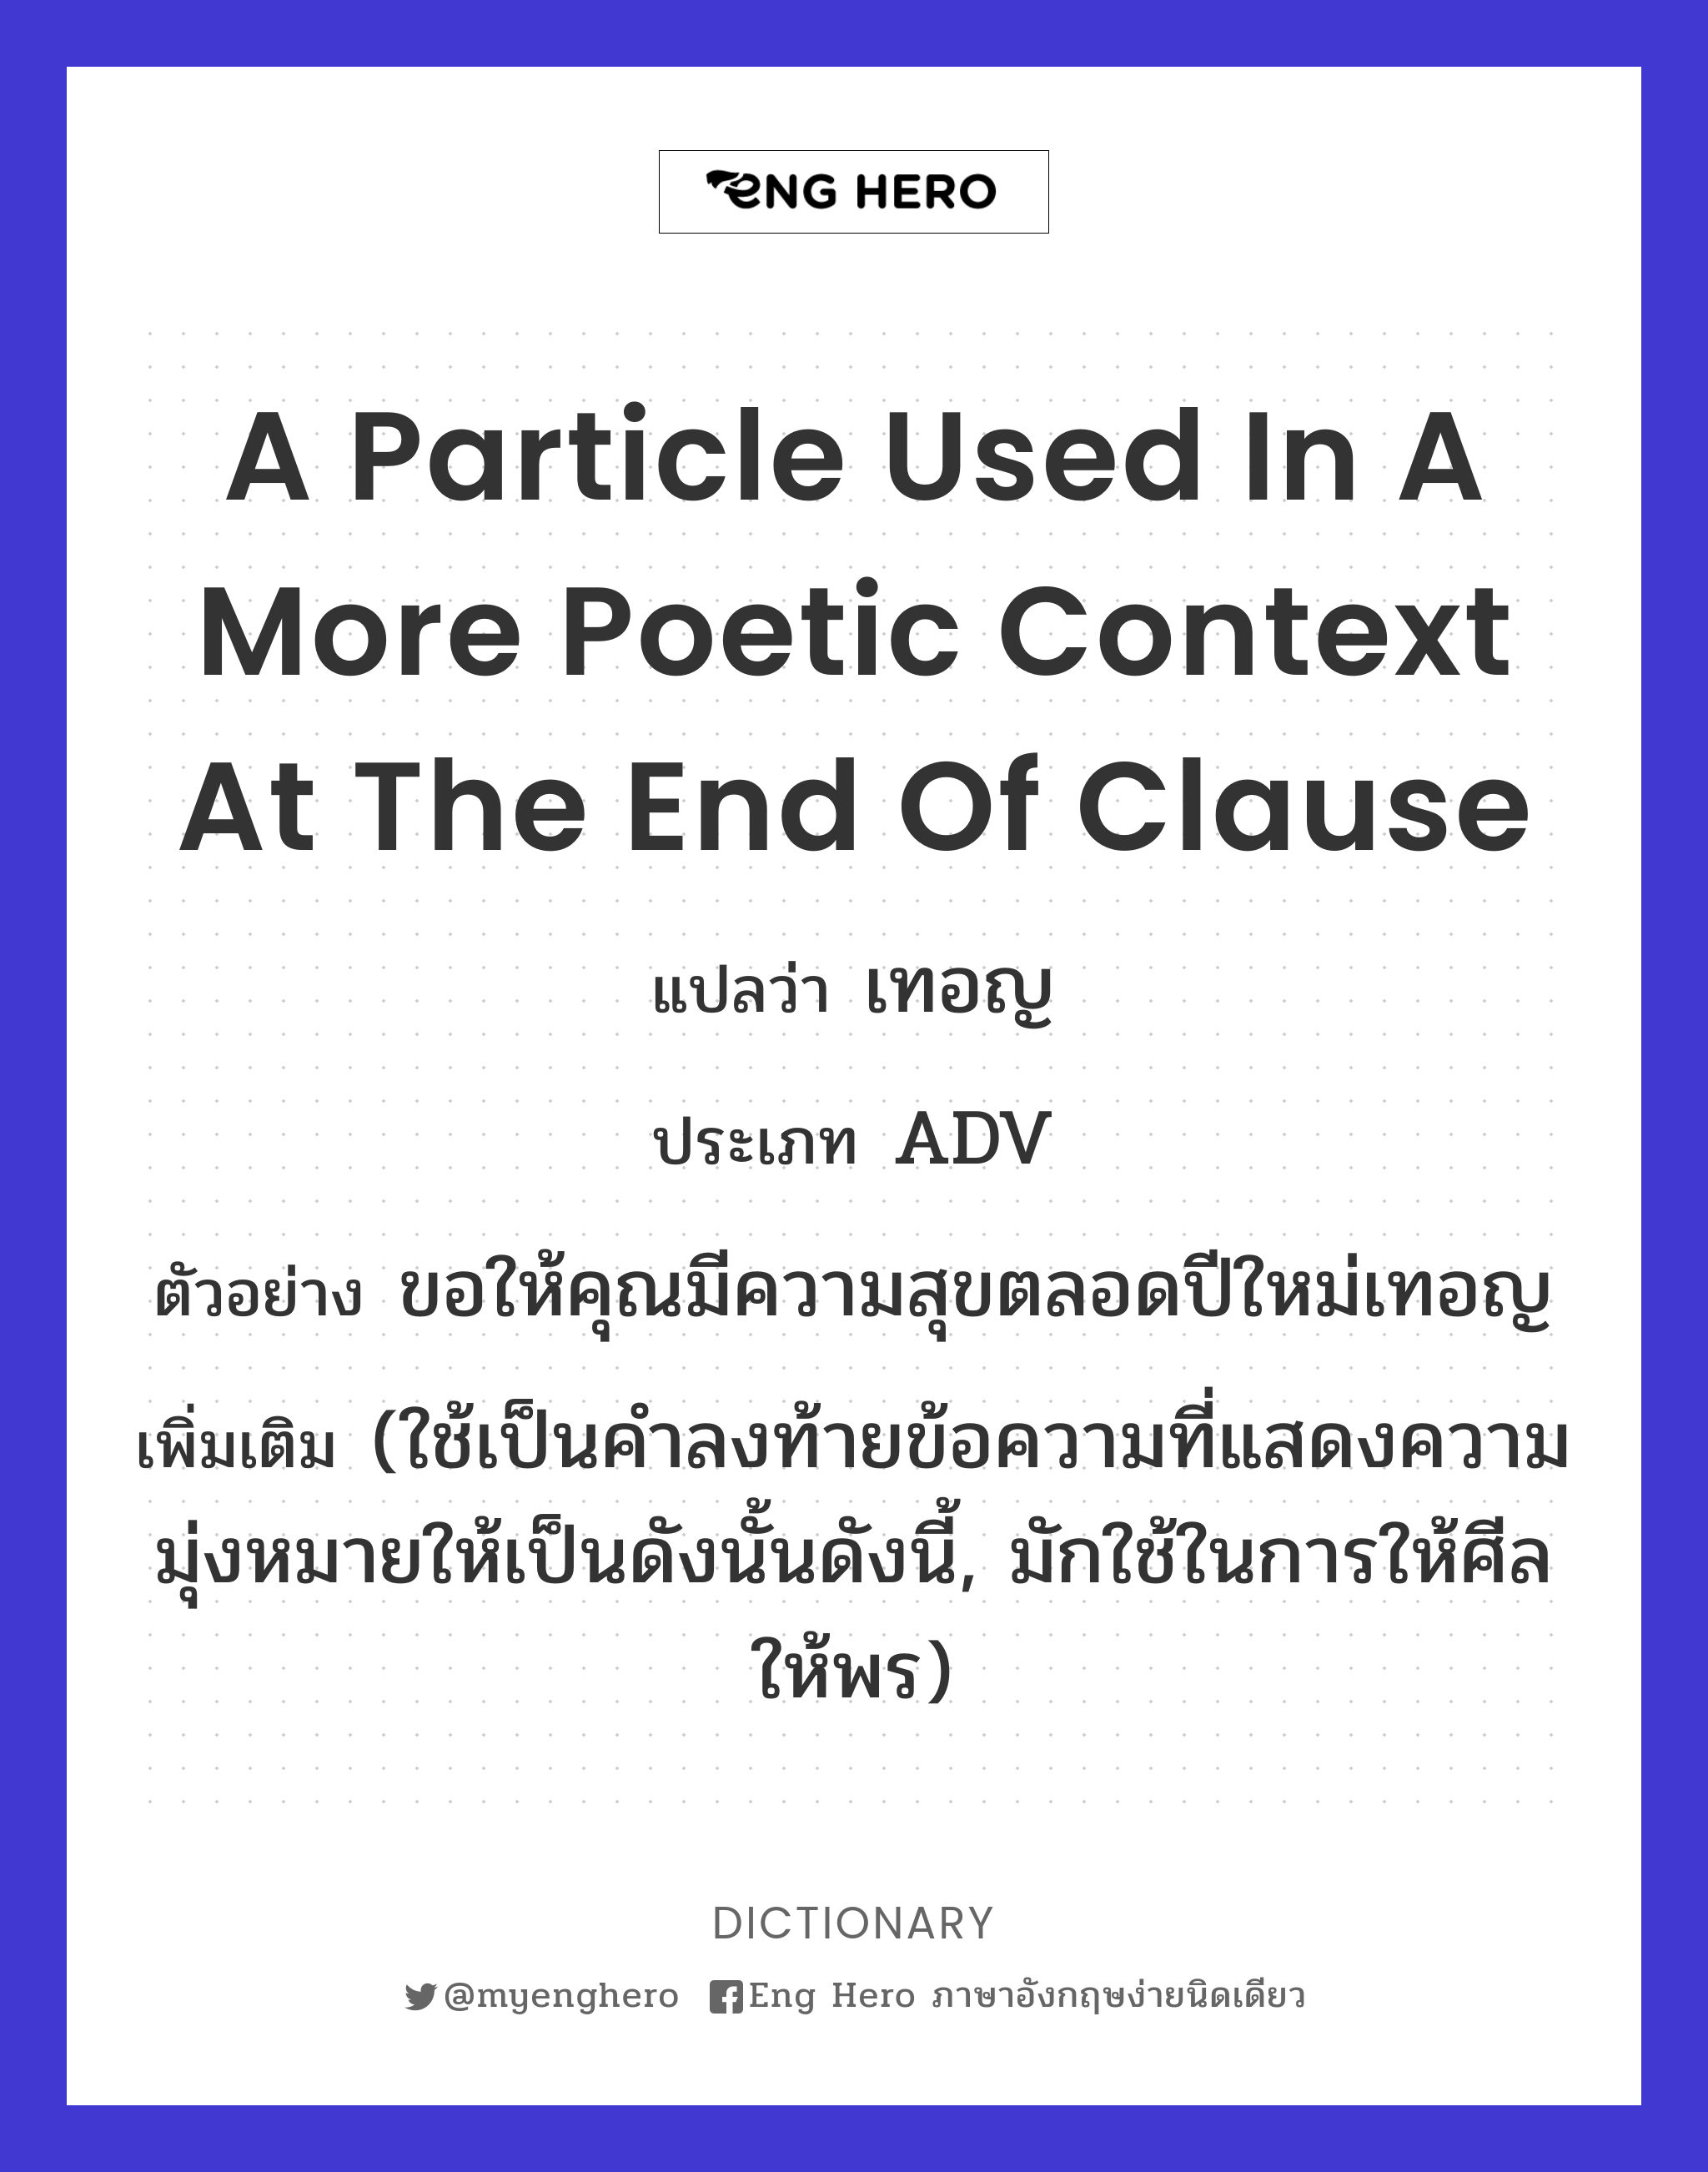 a particle used in a more poetic context at the end of clause